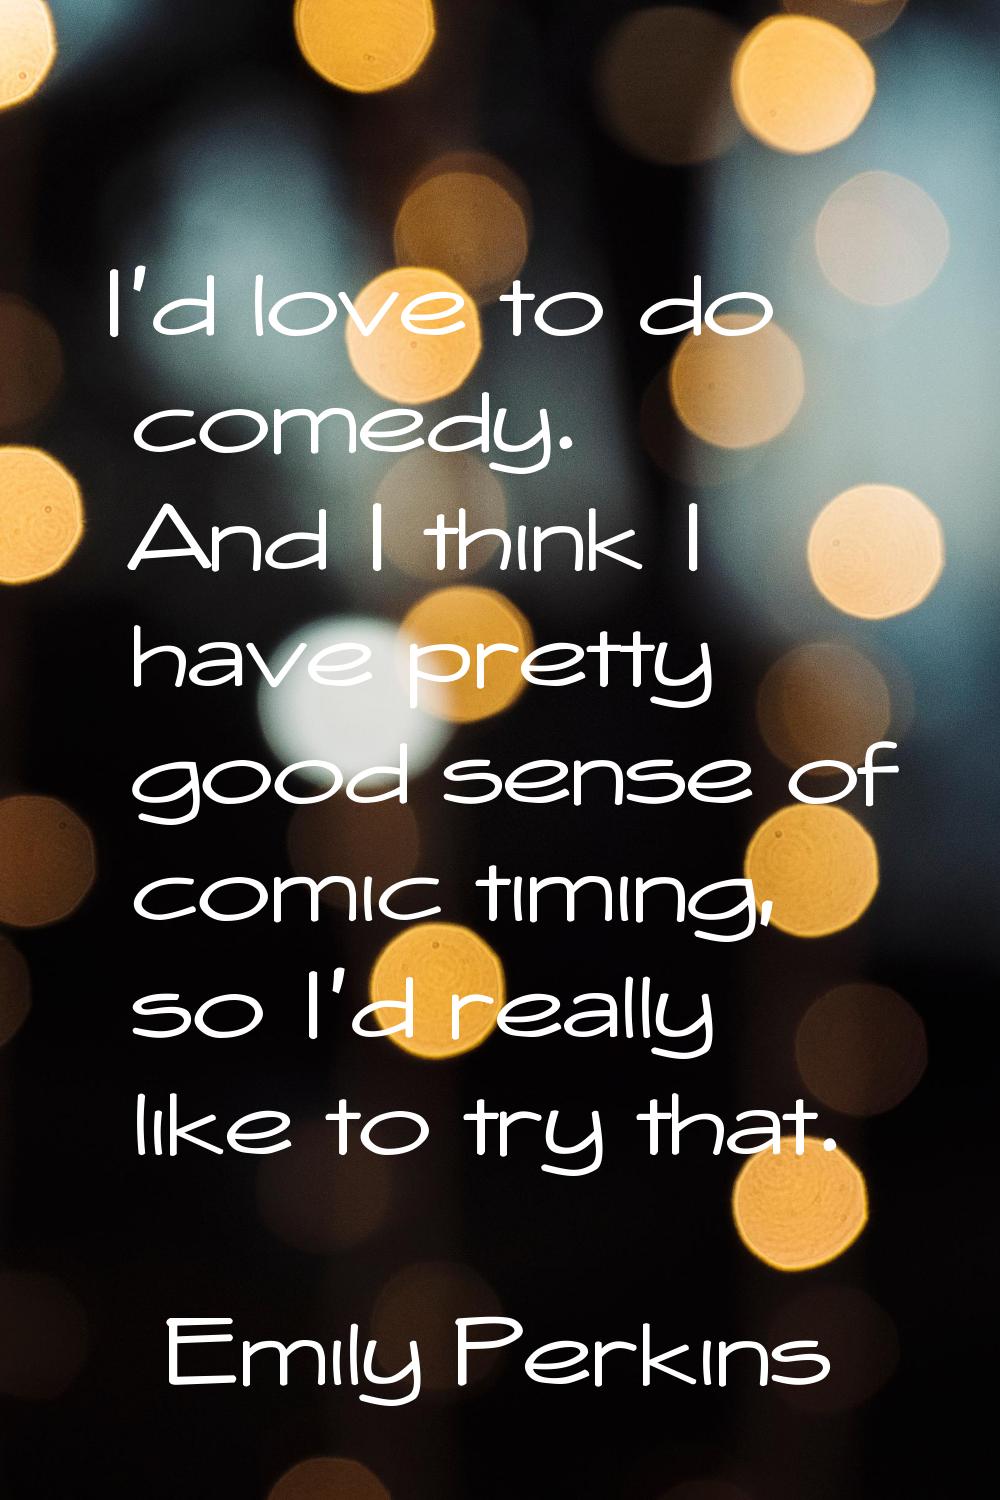 I'd love to do comedy. And I think I have pretty good sense of comic timing, so I'd really like to 